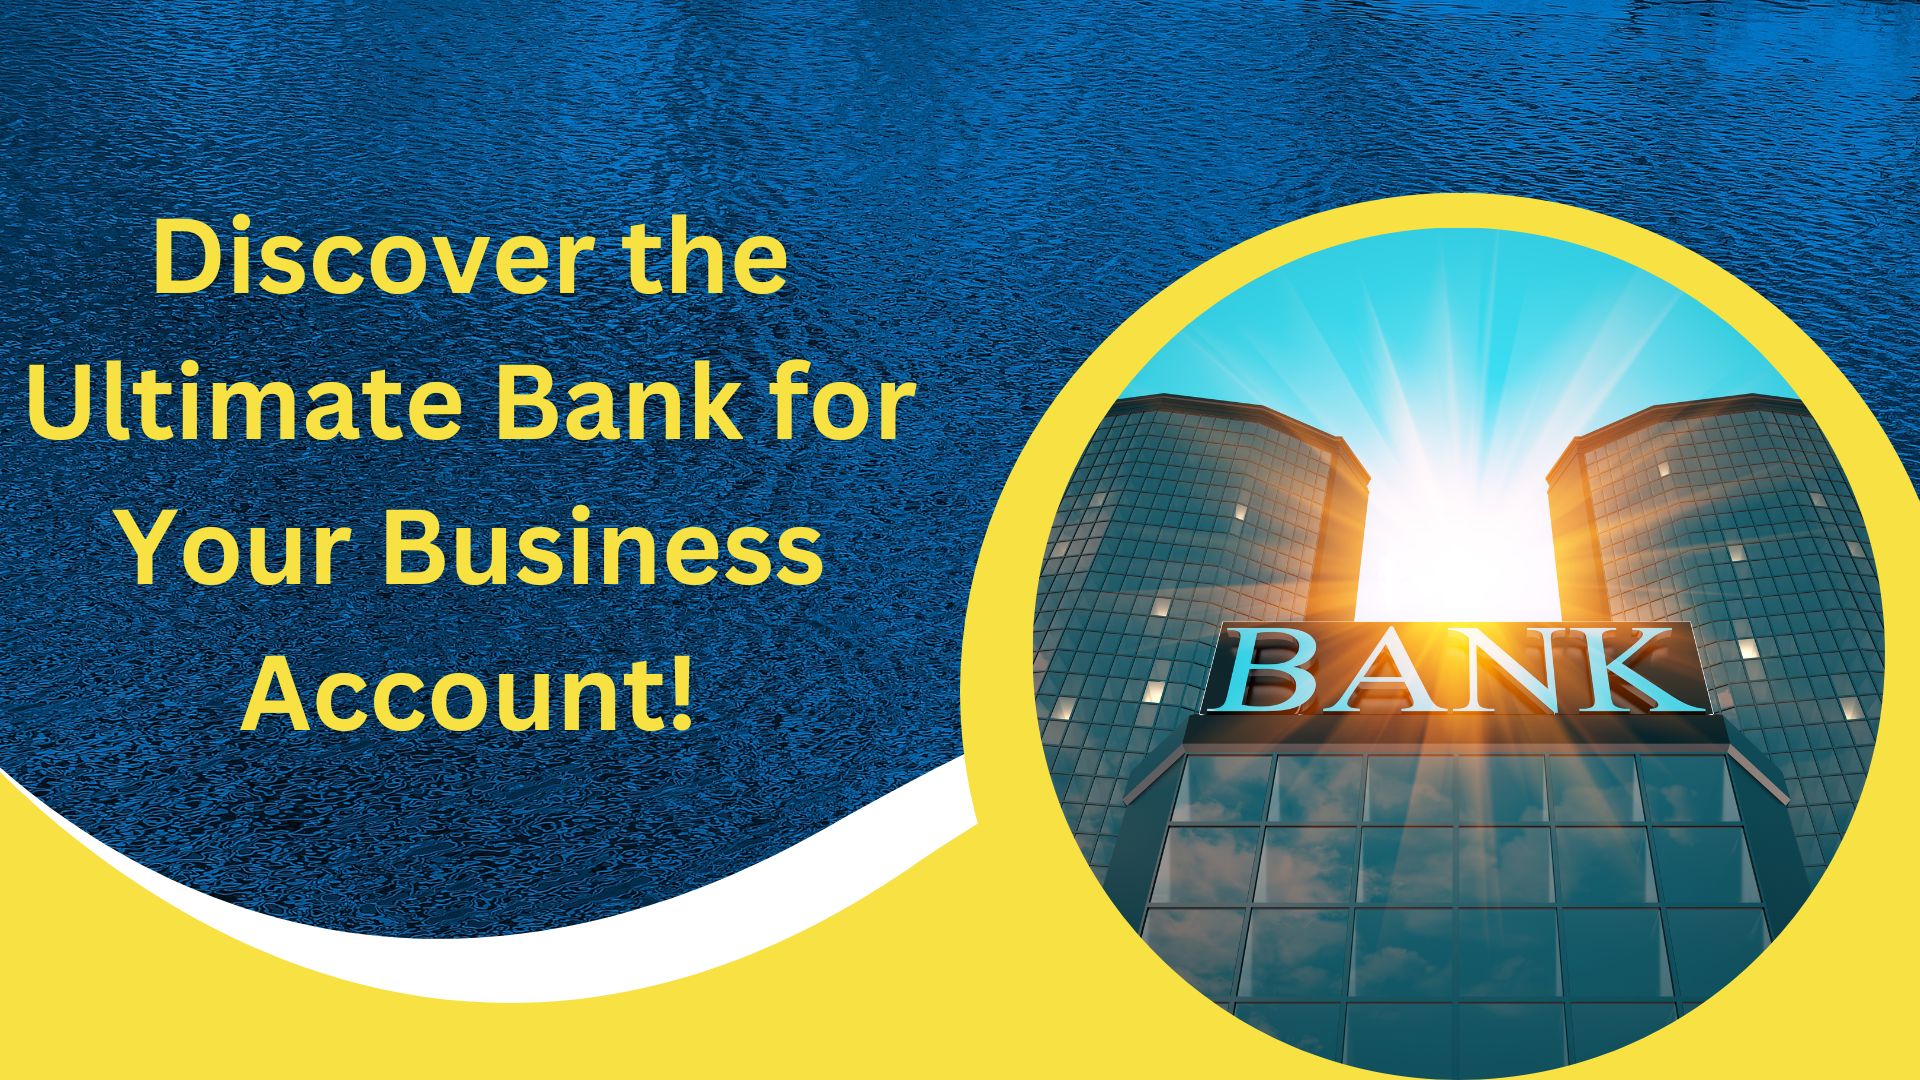 Discover the Ultimate Bank for Your Business Account!